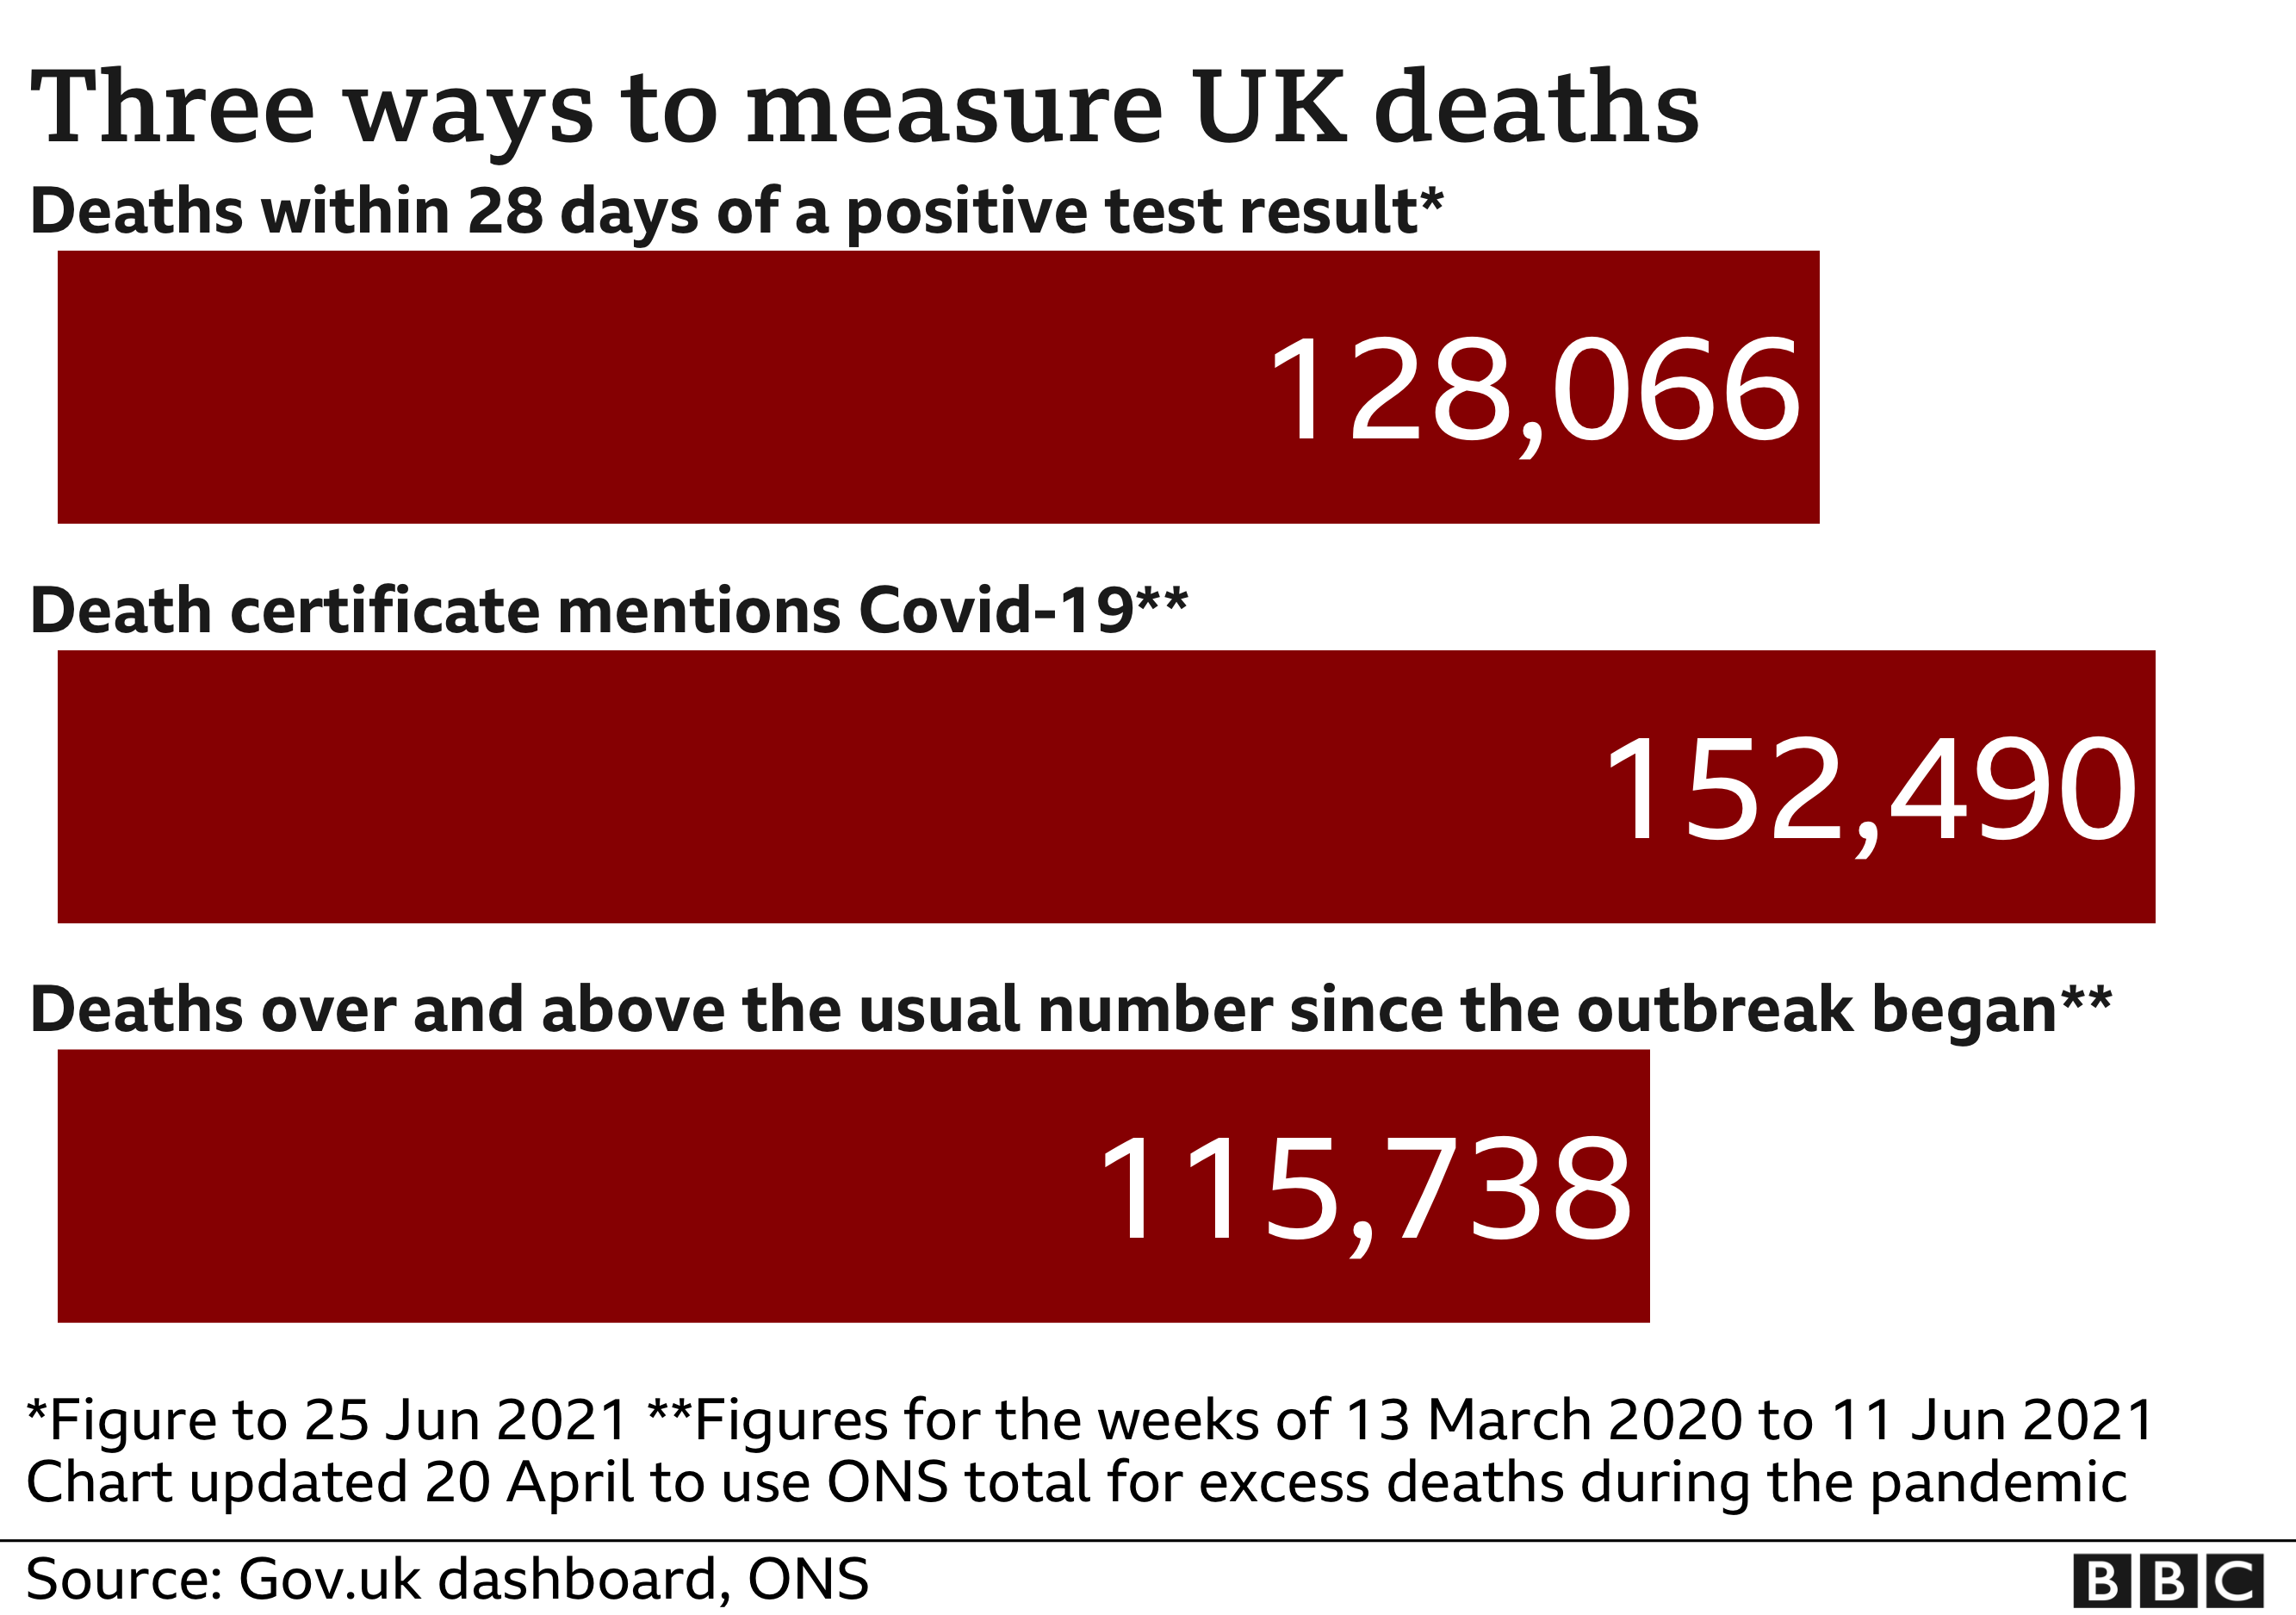 Chart showing the three ways of measuring UK deaths - government statistics count deaths within 28 days of a Covid test and that figure is now 128,066, death certificate mentions are now 152,490 and all deaths over and above normal measure 115,738. Updated 25 Jun.